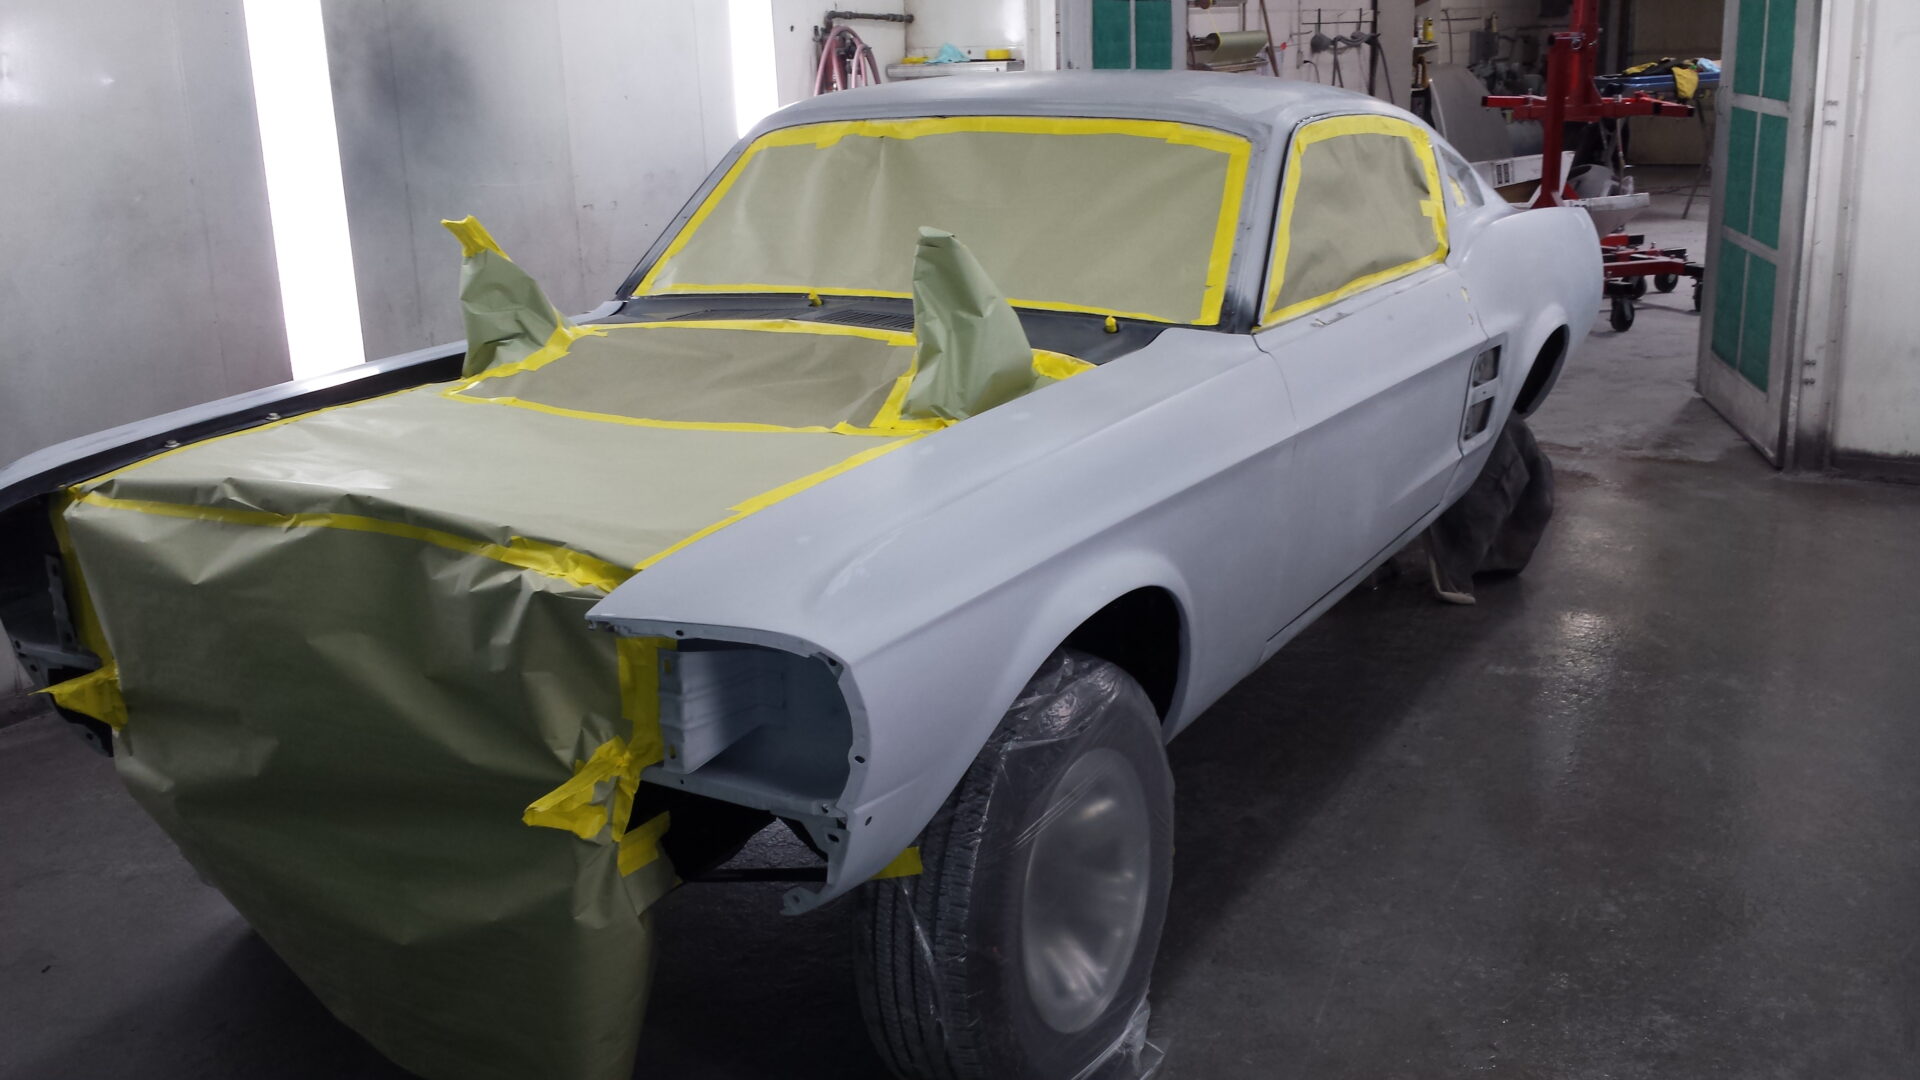 A grey coated 1967 Ford Mustang Fastback for paint job